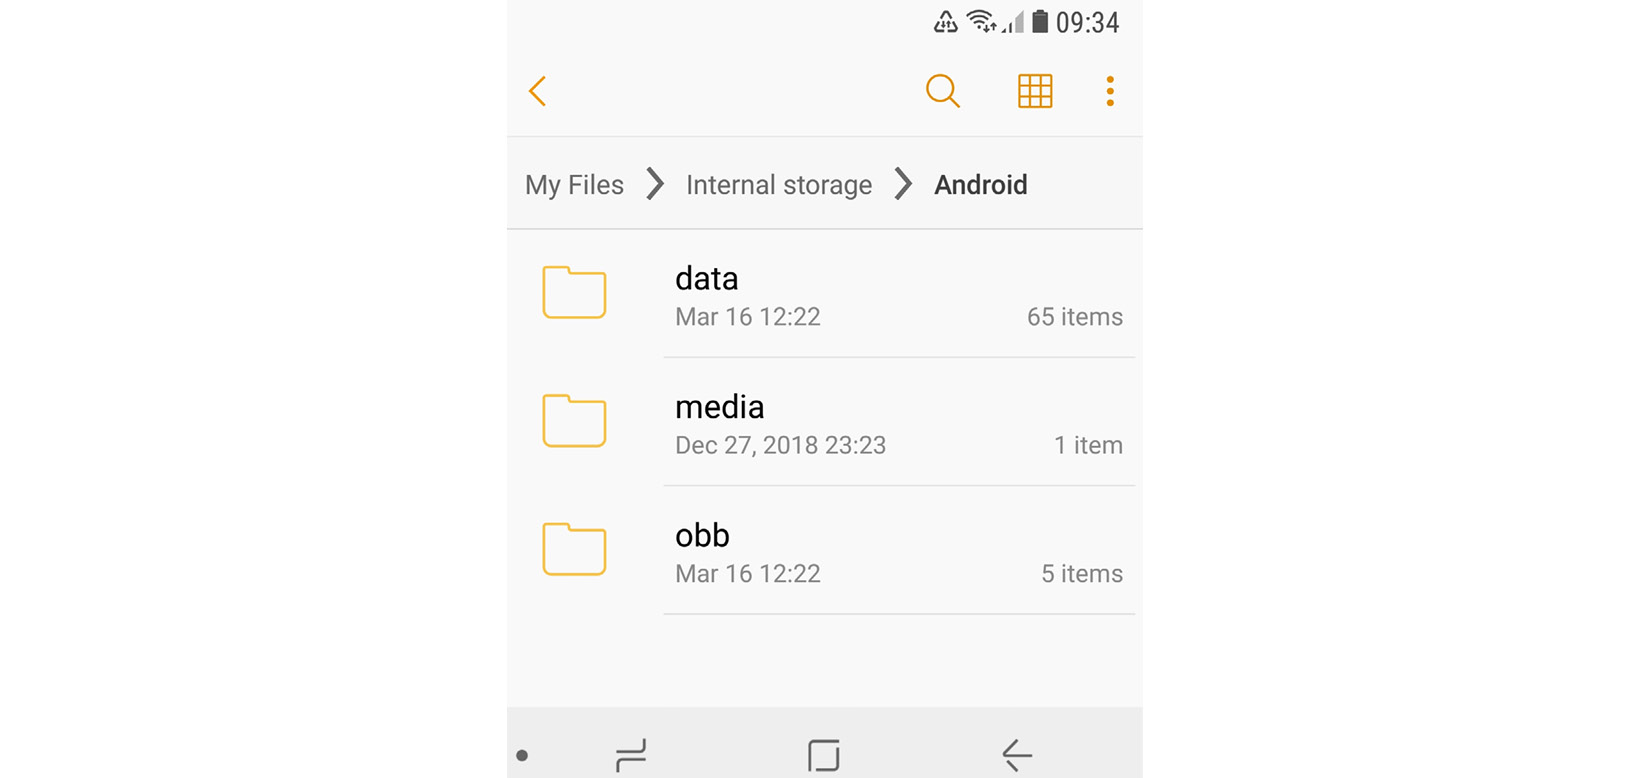 Figure 13.1 – The file manager referring to external storage as internal
